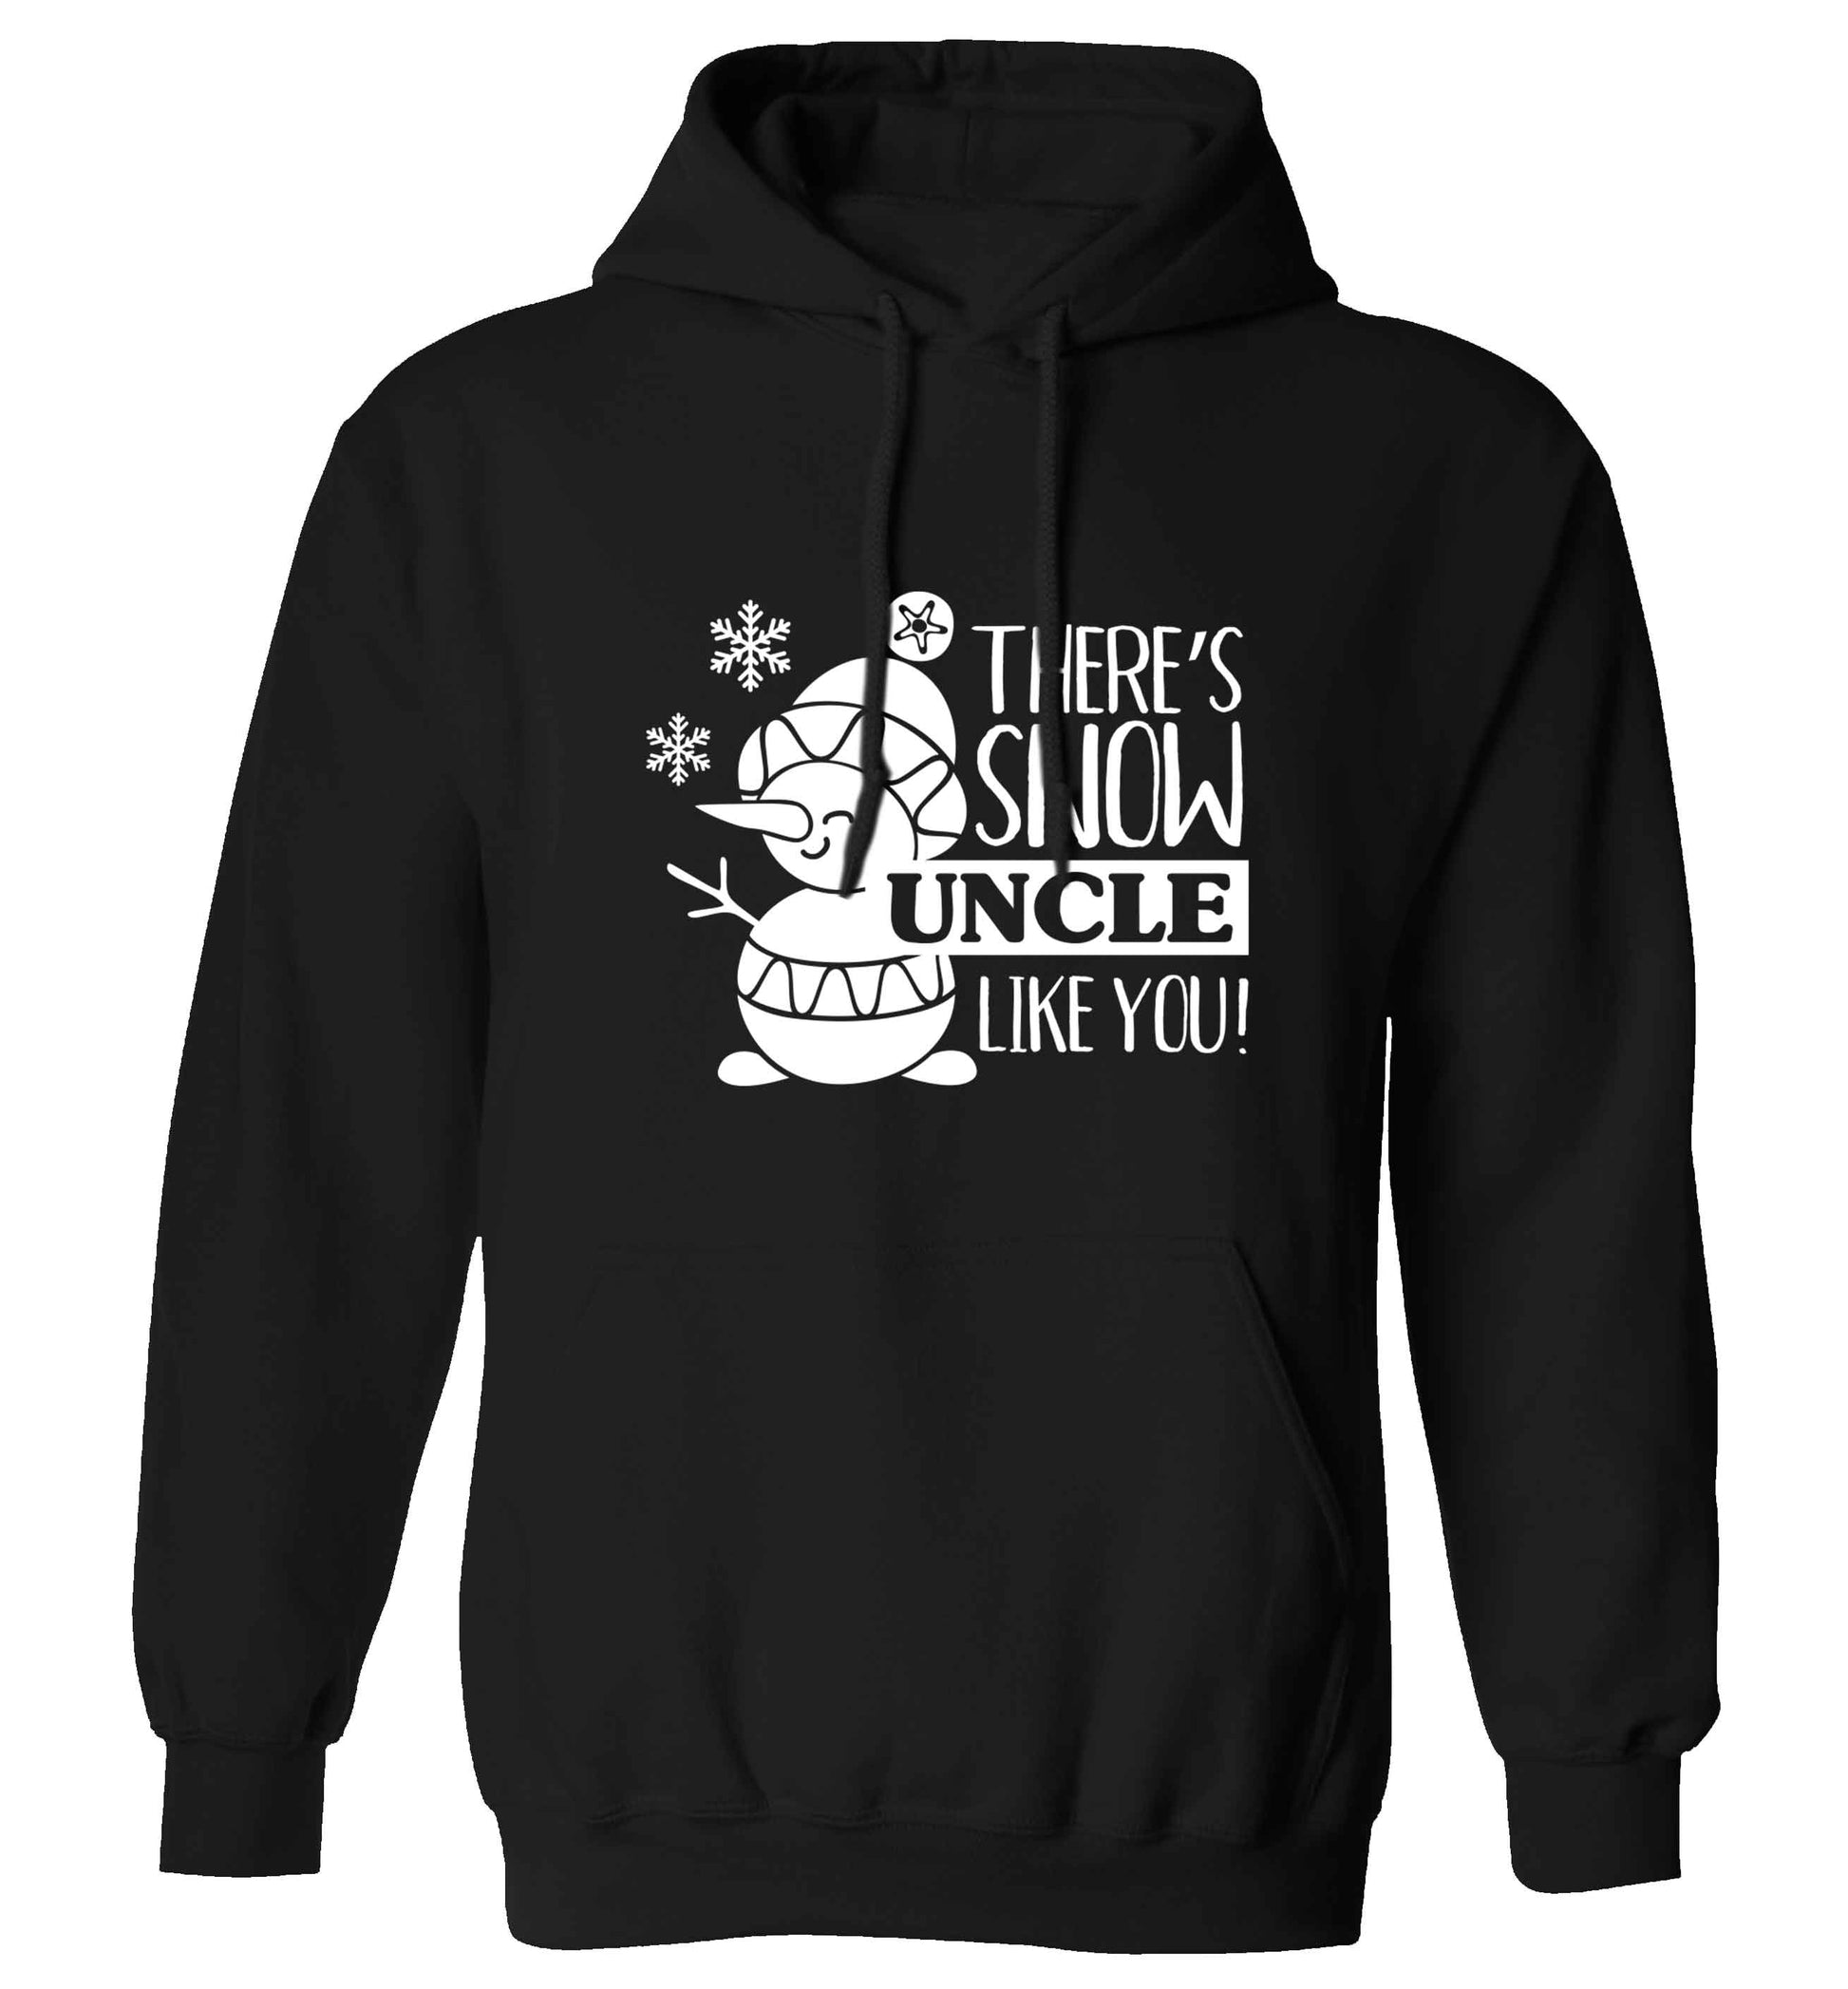 There's snow uncle like you adults unisex black hoodie 2XL